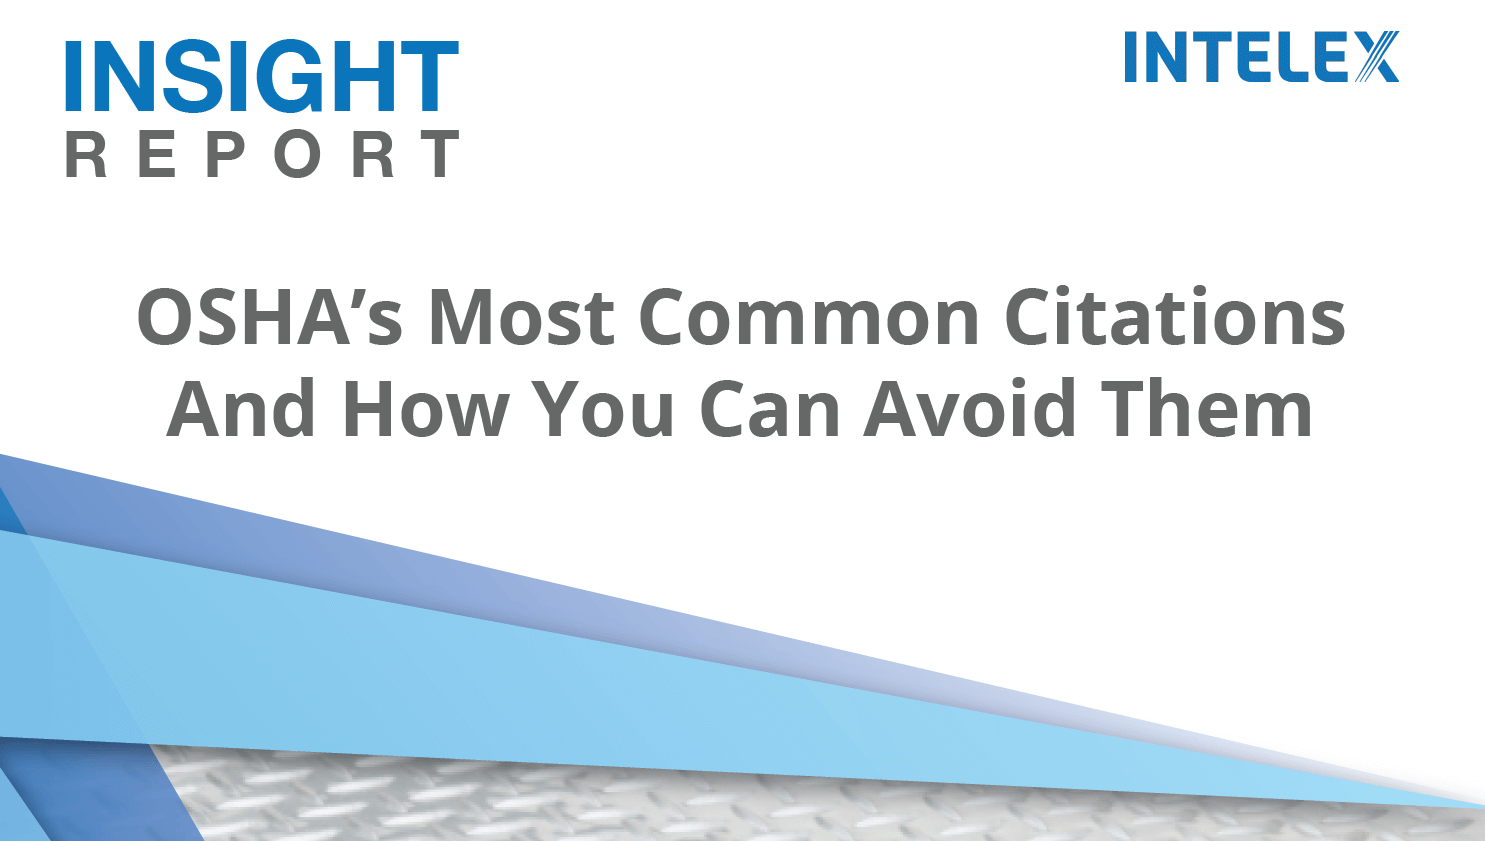 OSHA’s Most Common Citations And How You Can Avoid Them